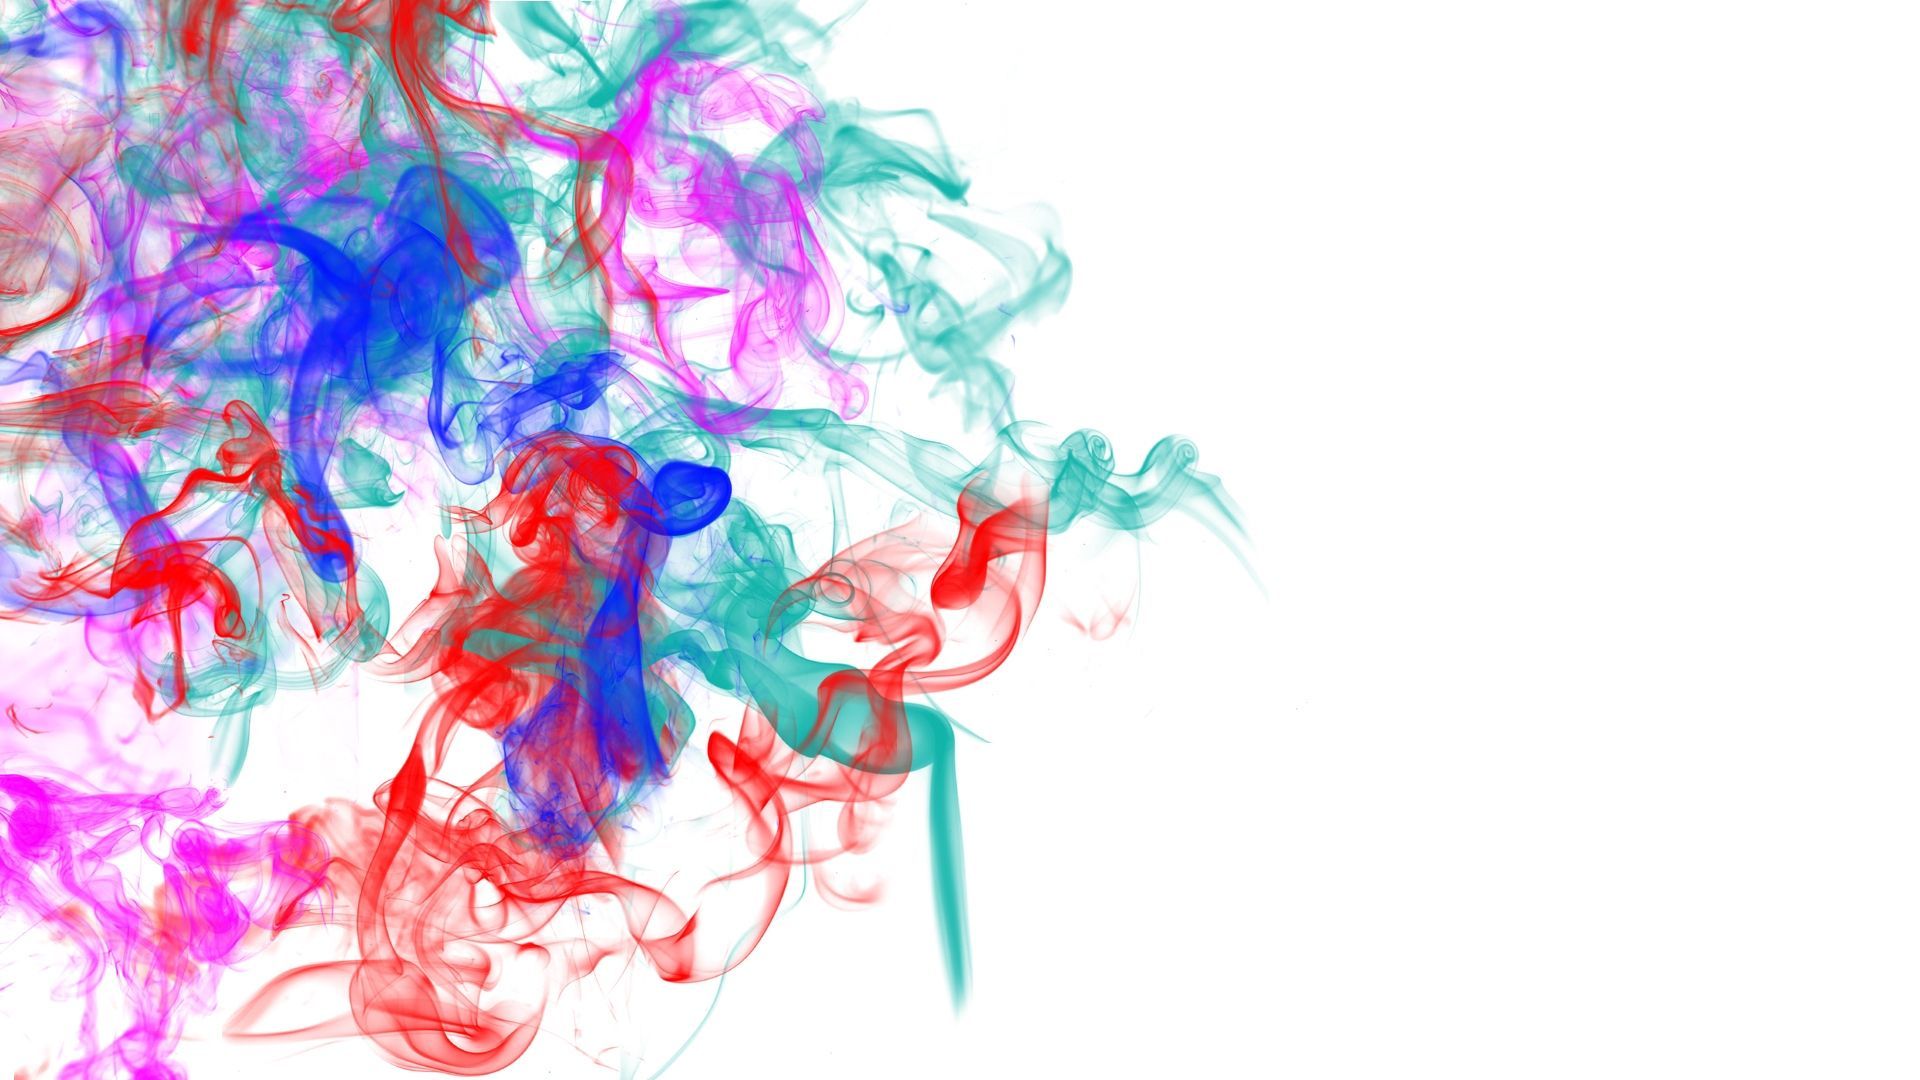 Download Wallpaper 1920x1080 Smoke, Patterns, Lines, Colorful Full ...